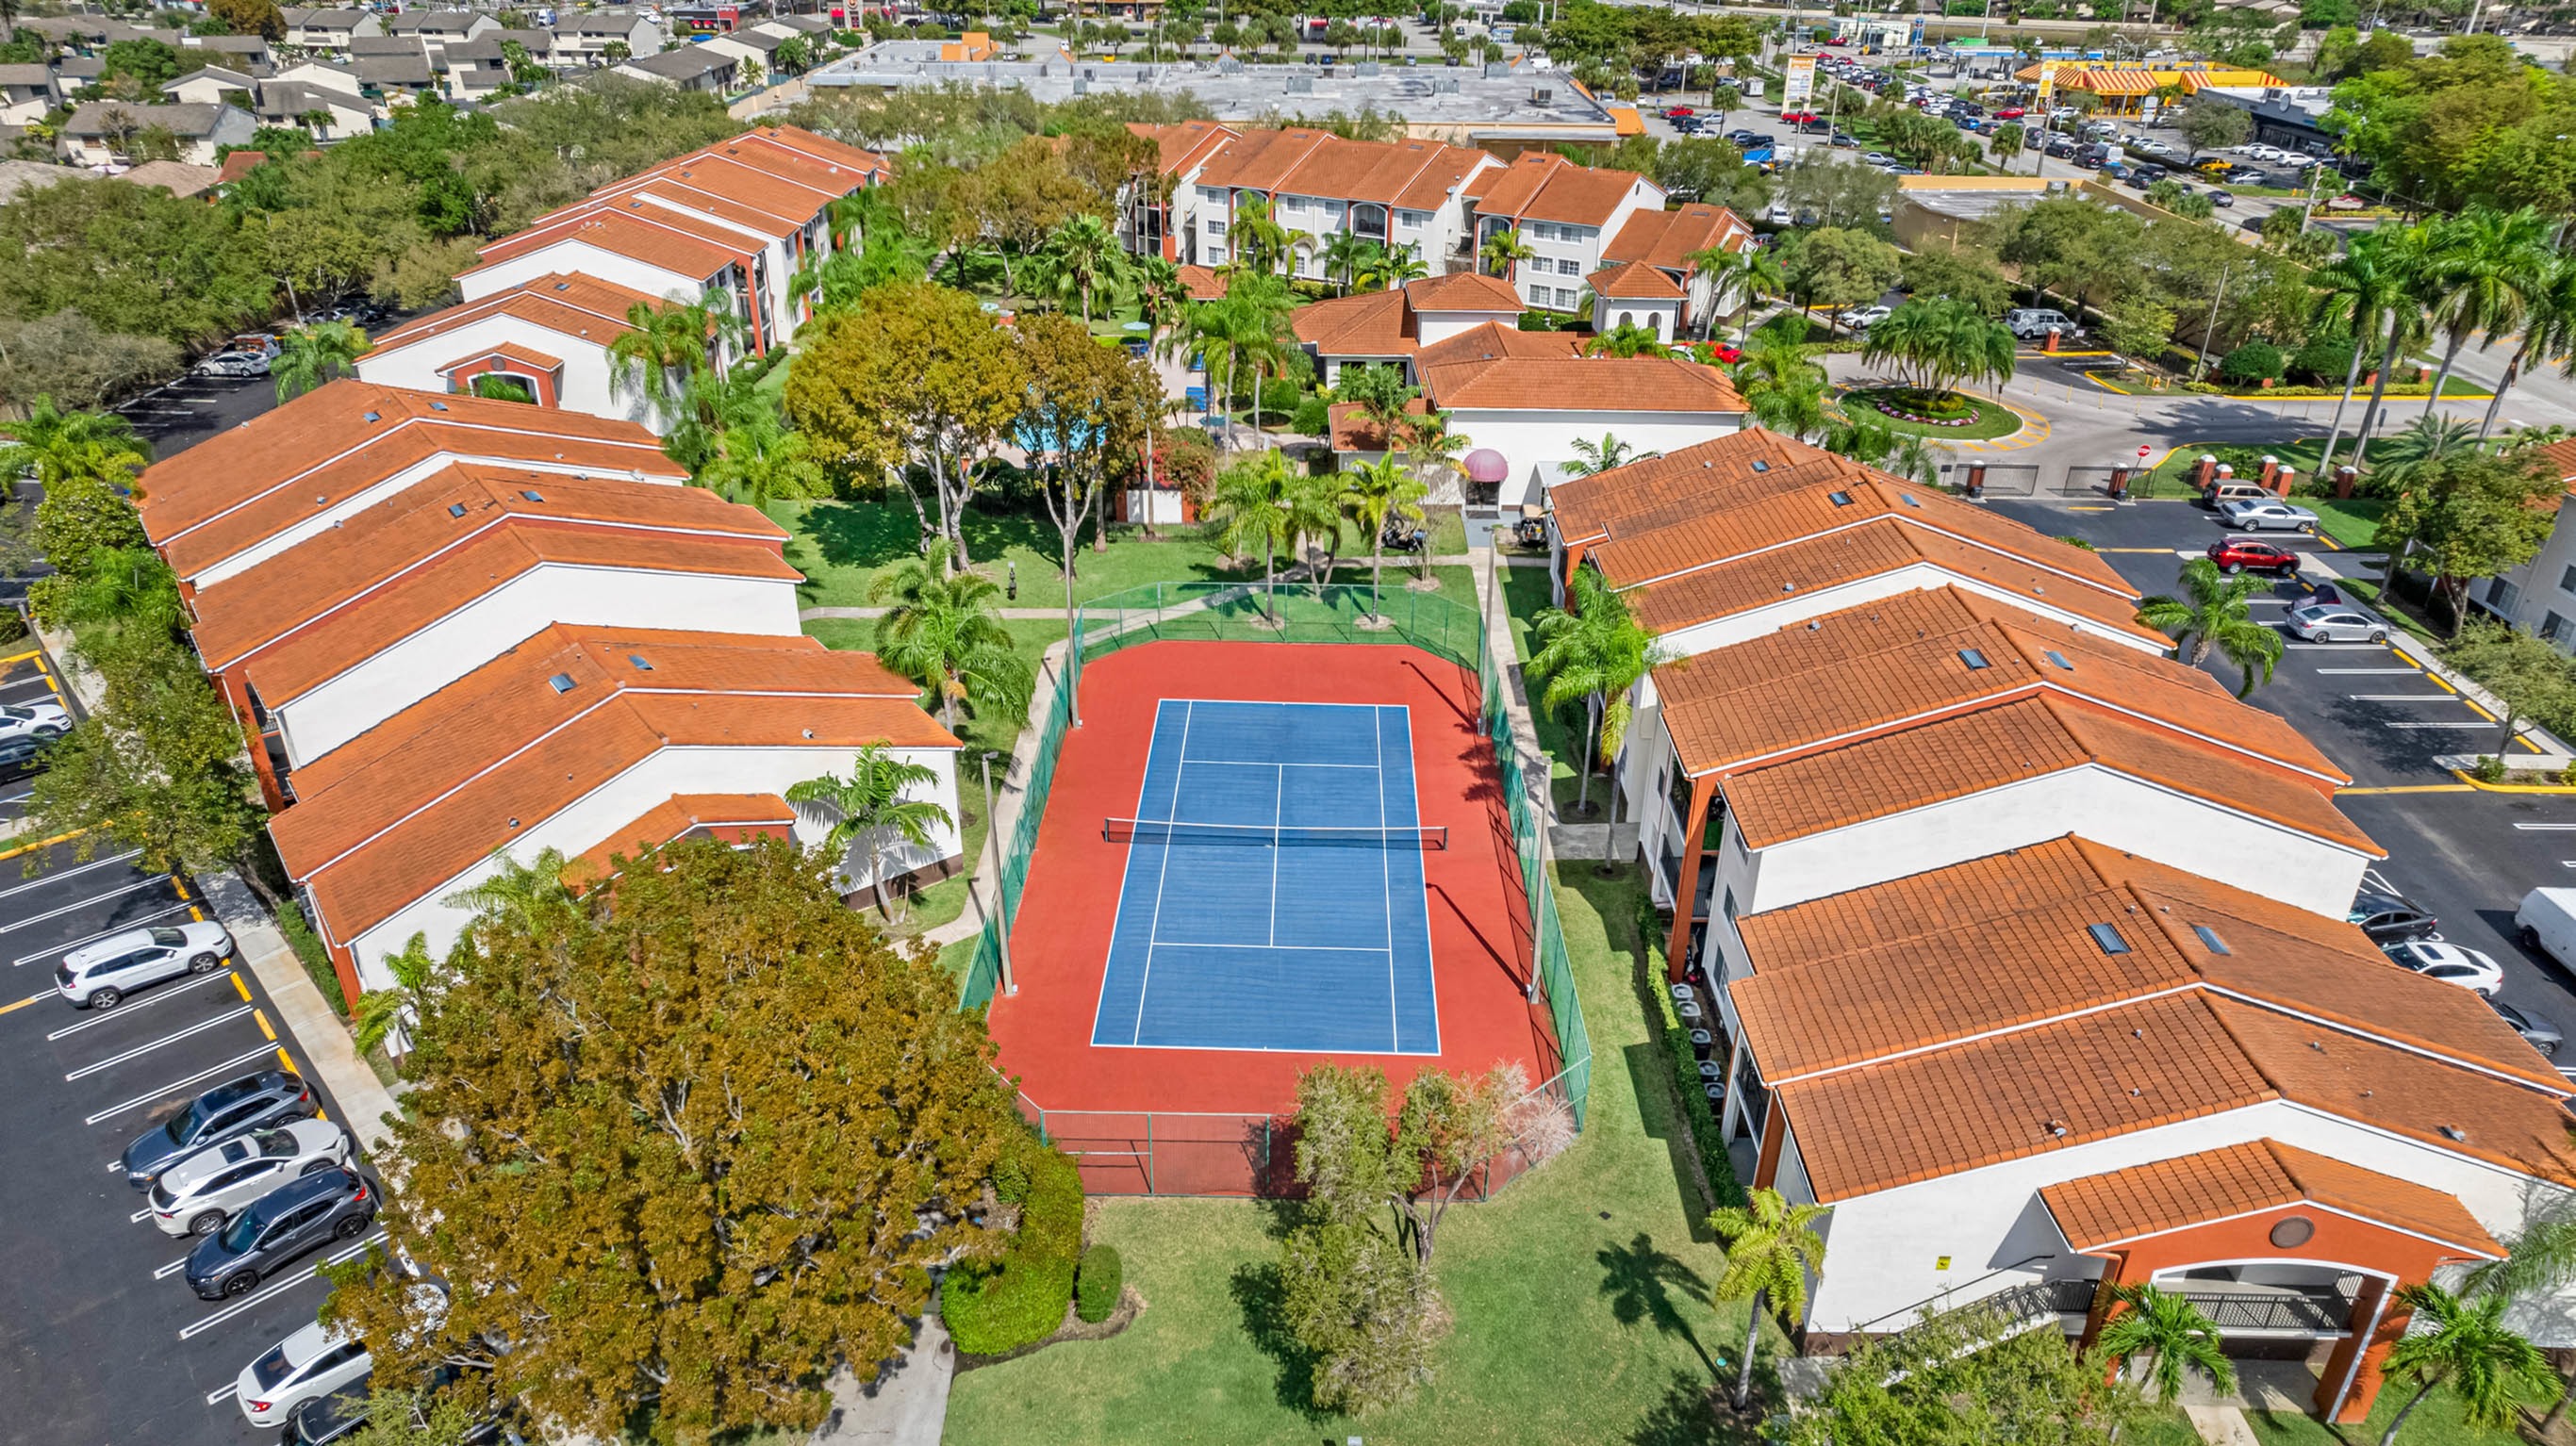 Panoramic view of community outdoor tennis court, fenced on all sides